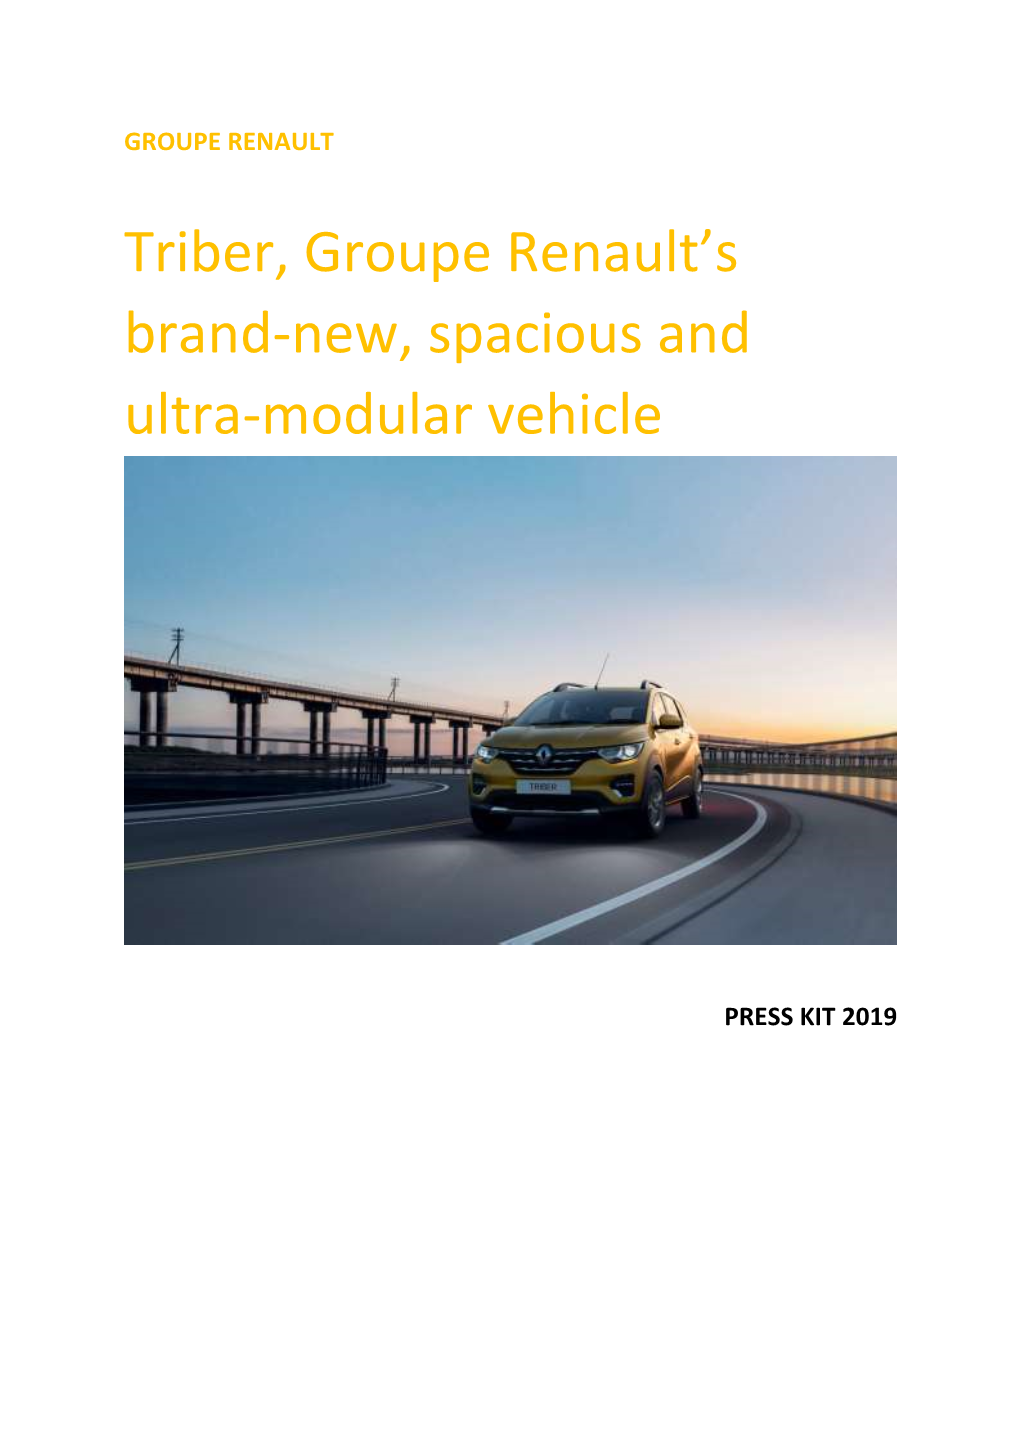 Triber, Groupe Renault's Brand-New, Spacious and Ultra-Modular Vehicle